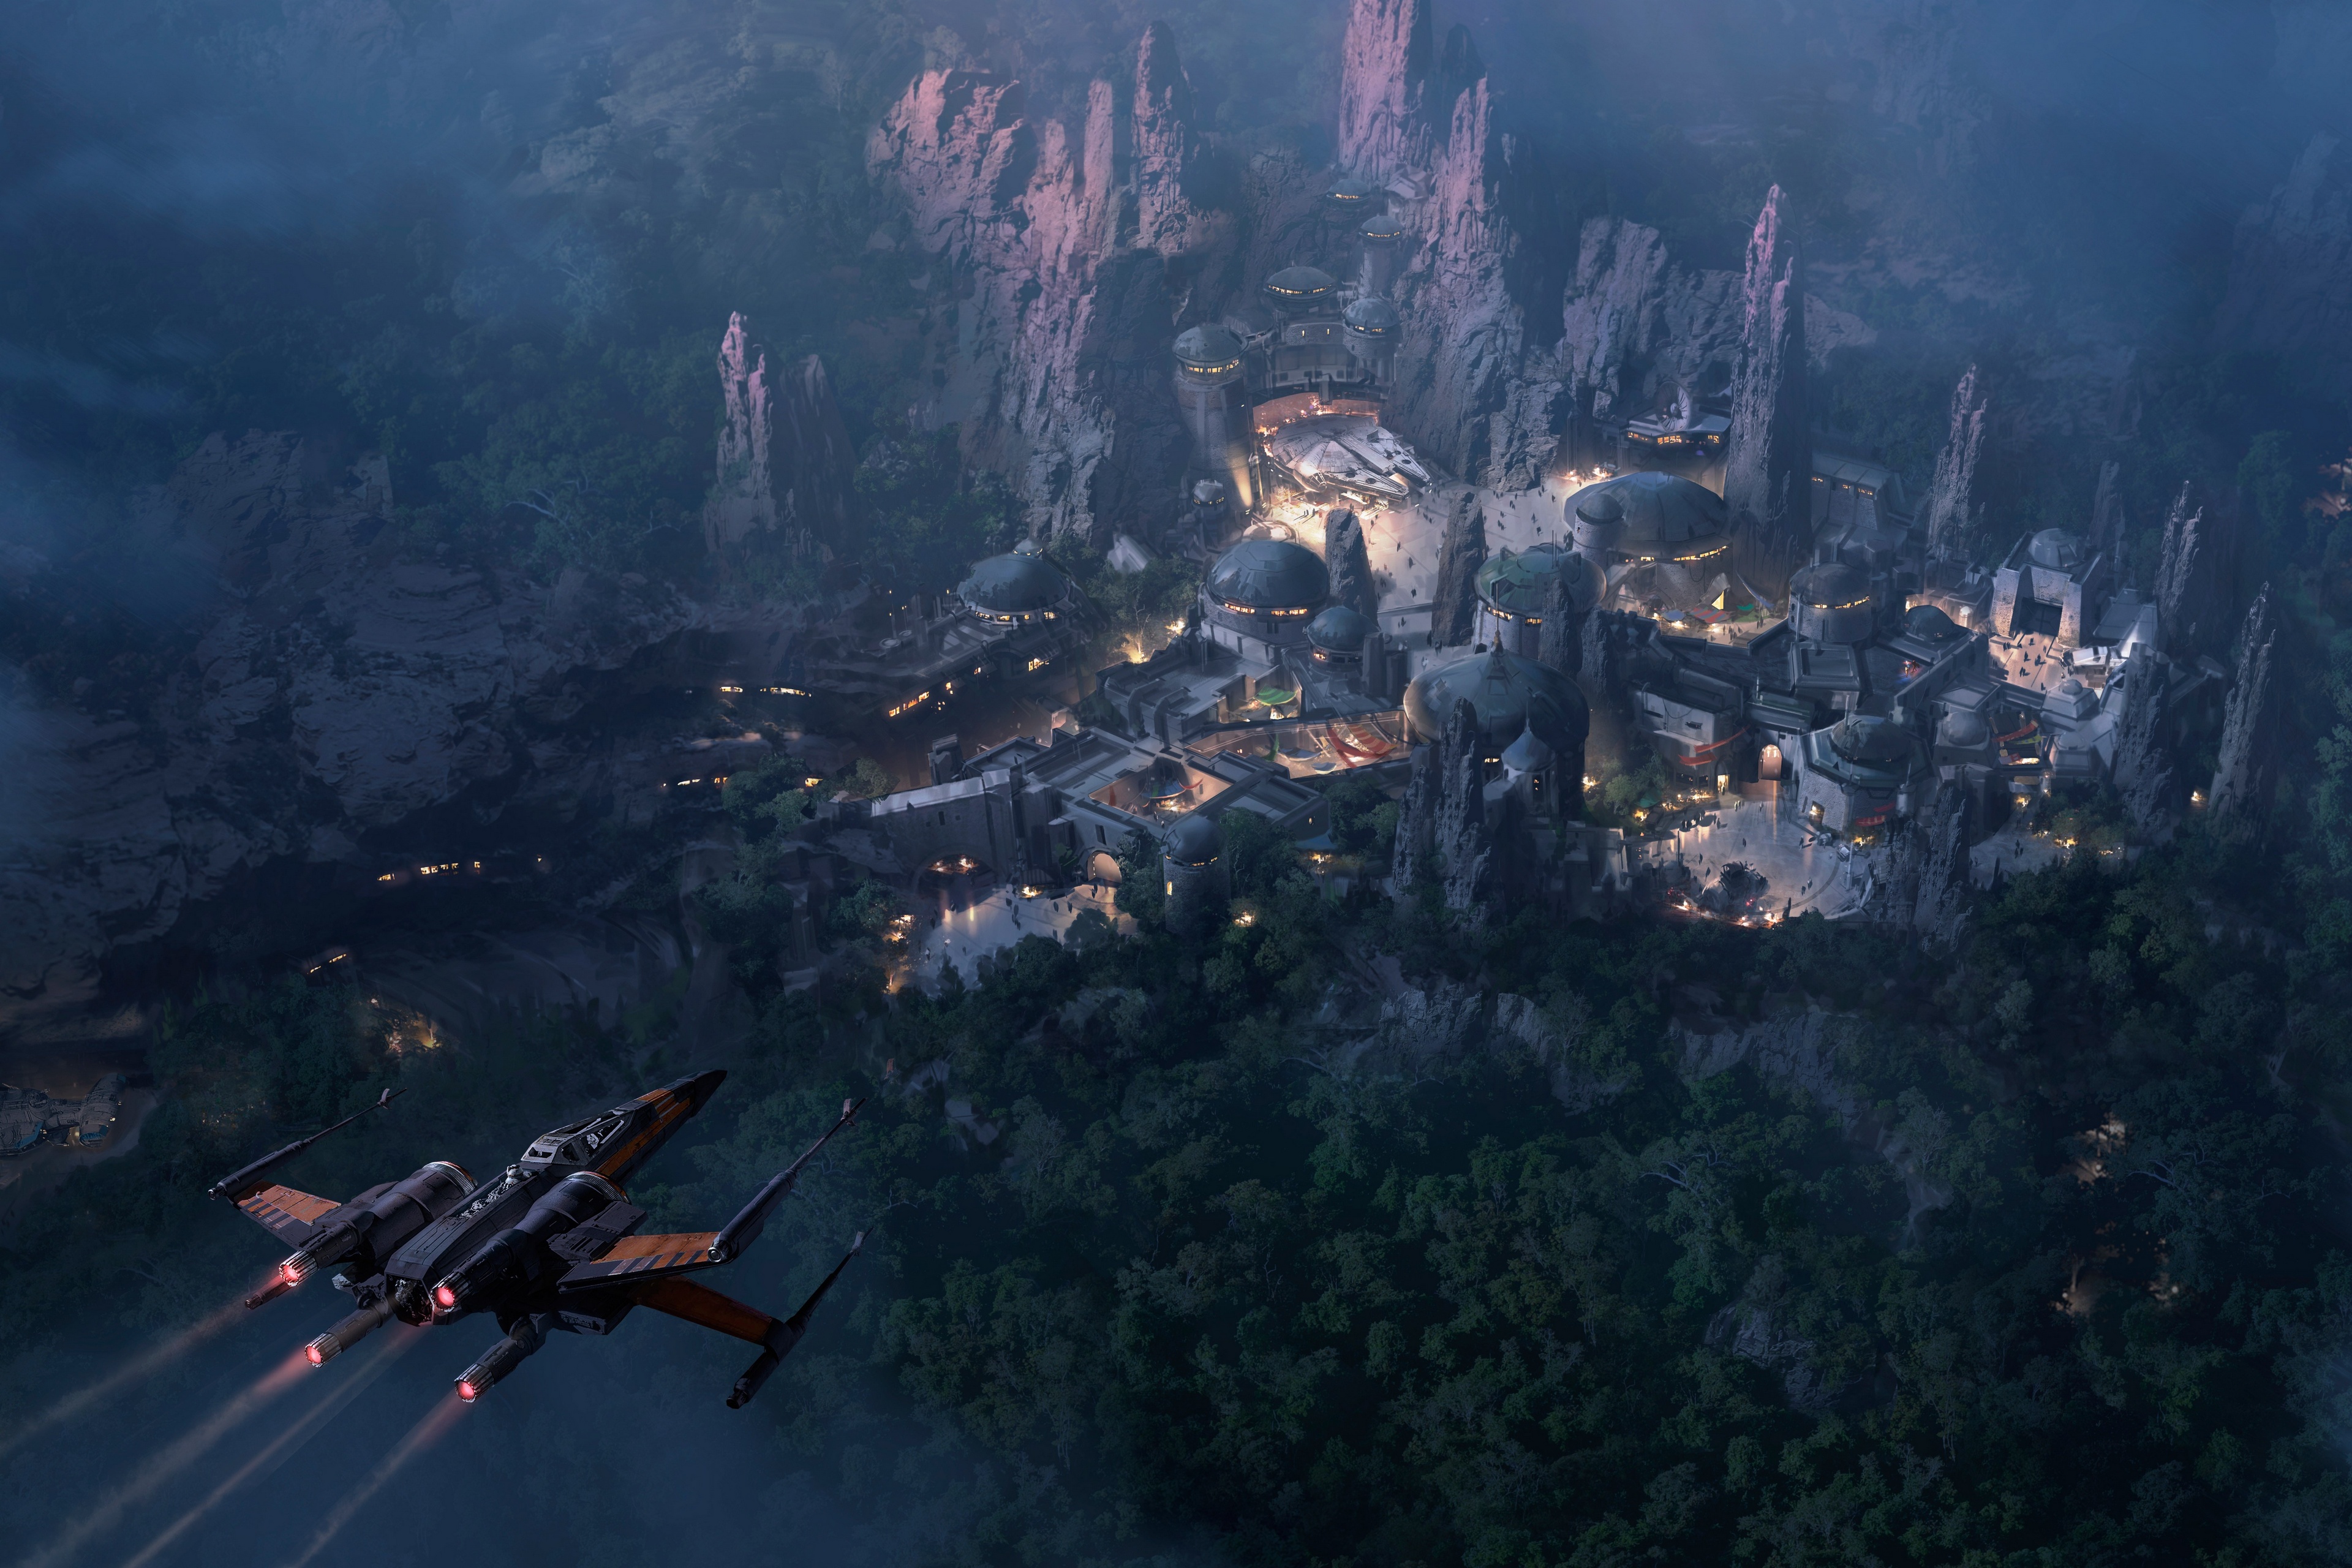 General 3840x2560 Star Wars science fiction spaceship mountains forest fort city fantasy art X-wing digital art